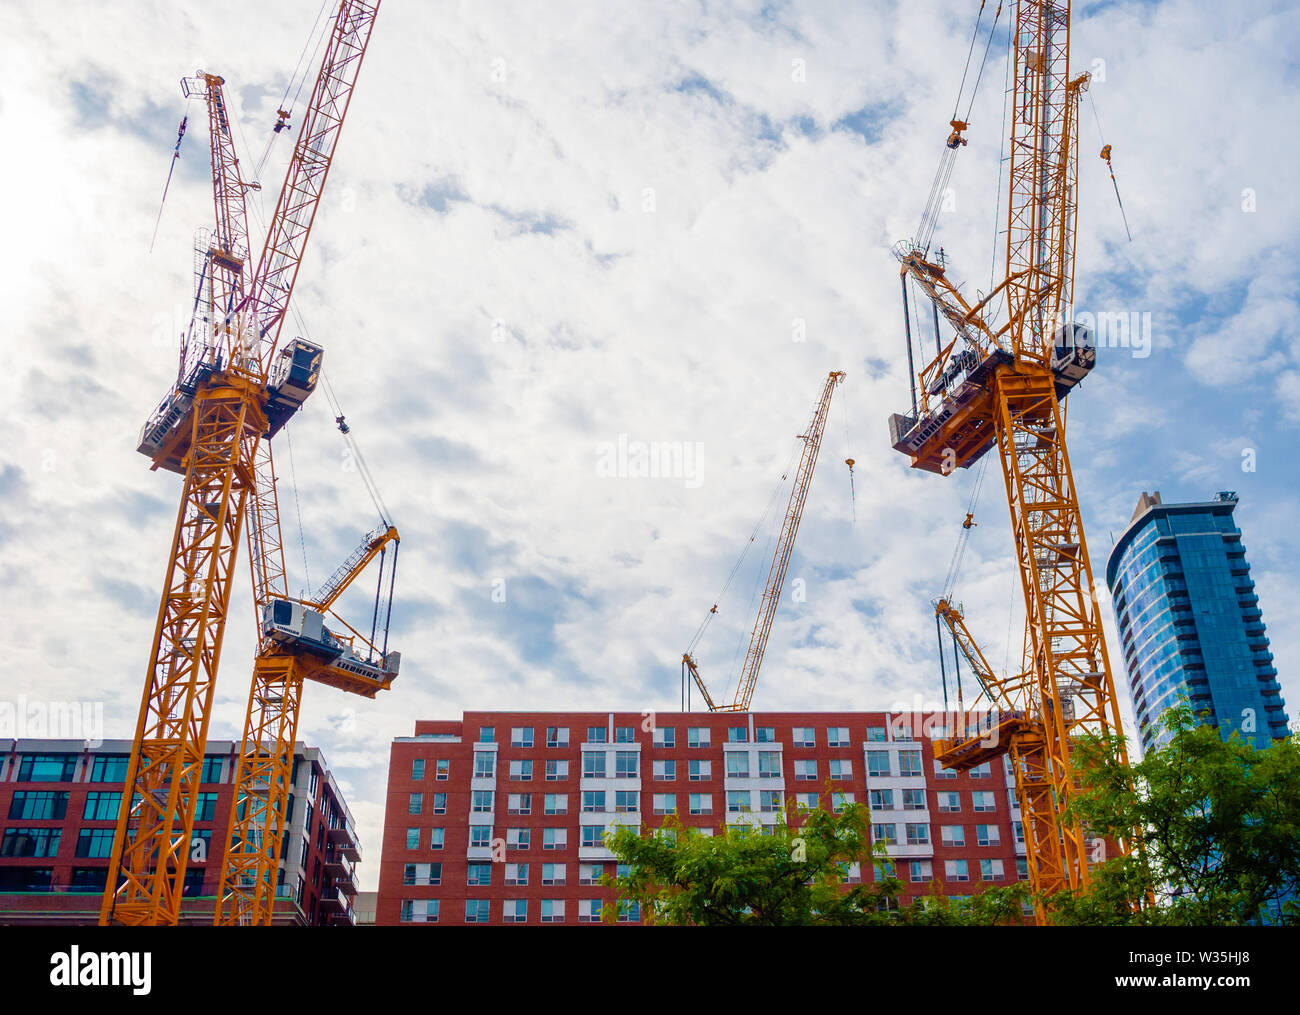 MONTREAL, CANADA - JUNE 17, 2018: Multiple cranes are set up downtown for a large construction project. Stock Photo